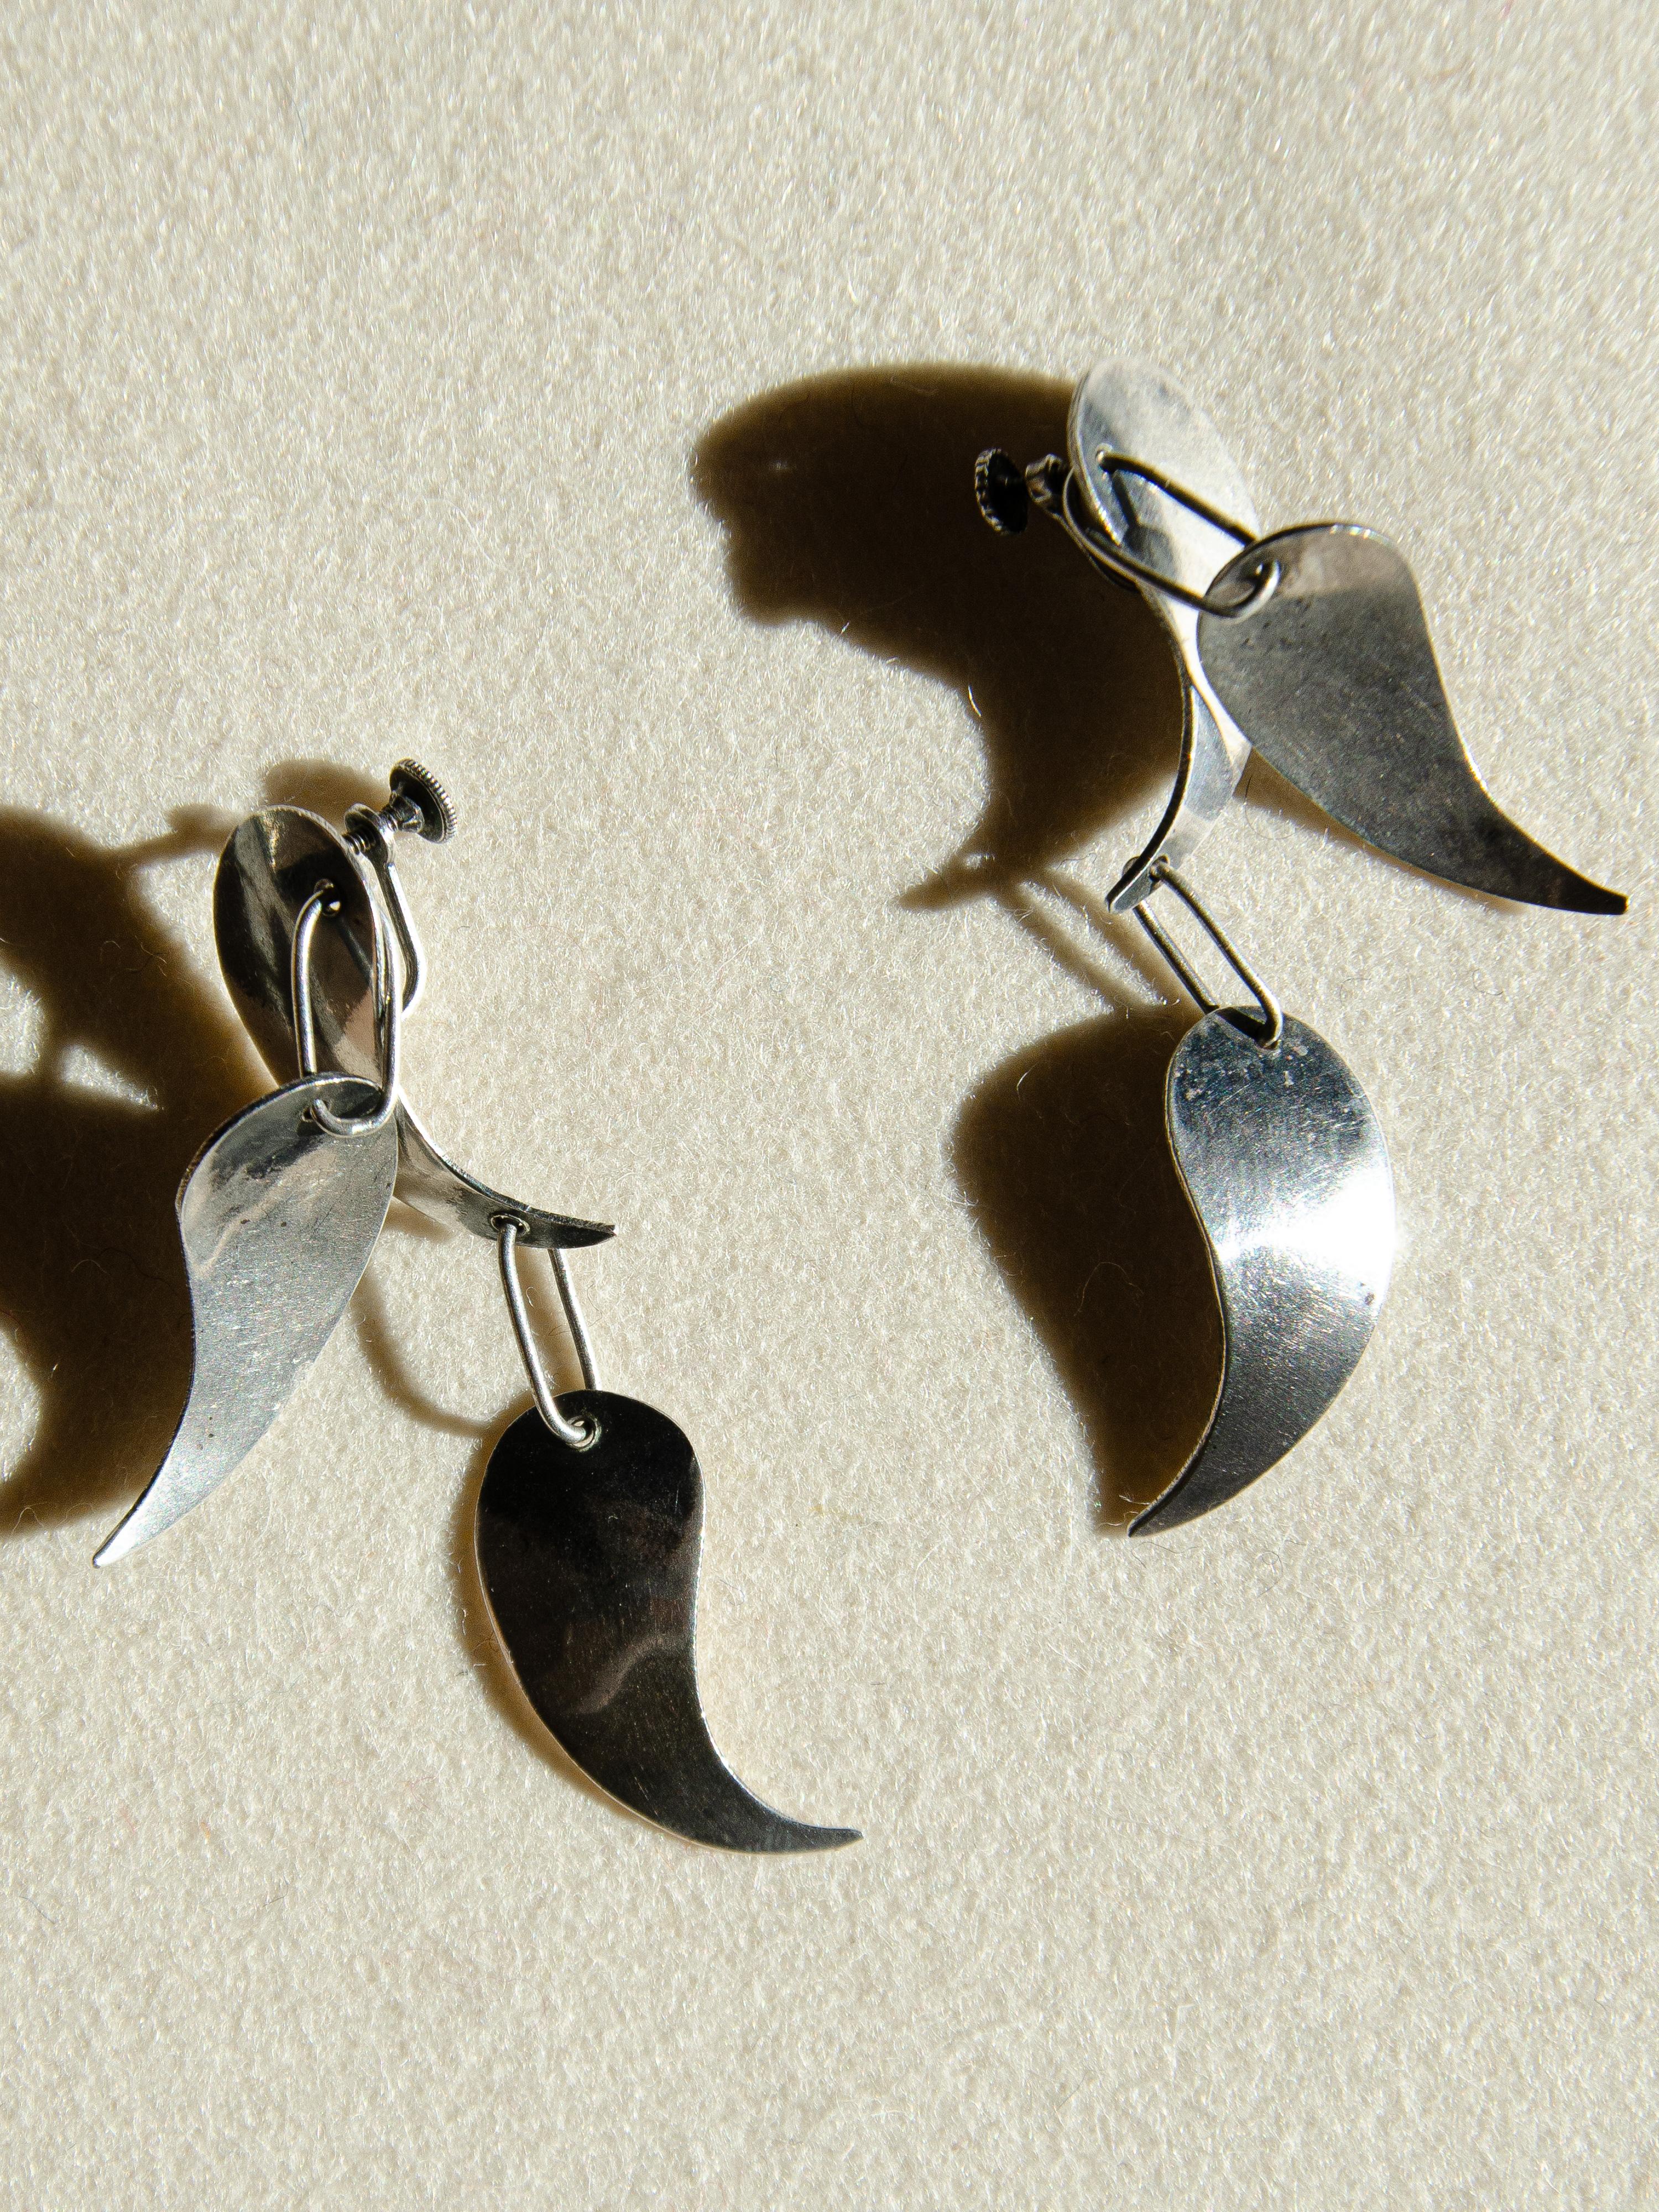 American Rare Mid-Century Modernist Sterling Silver Petal Earrings By Art Smith For Sale